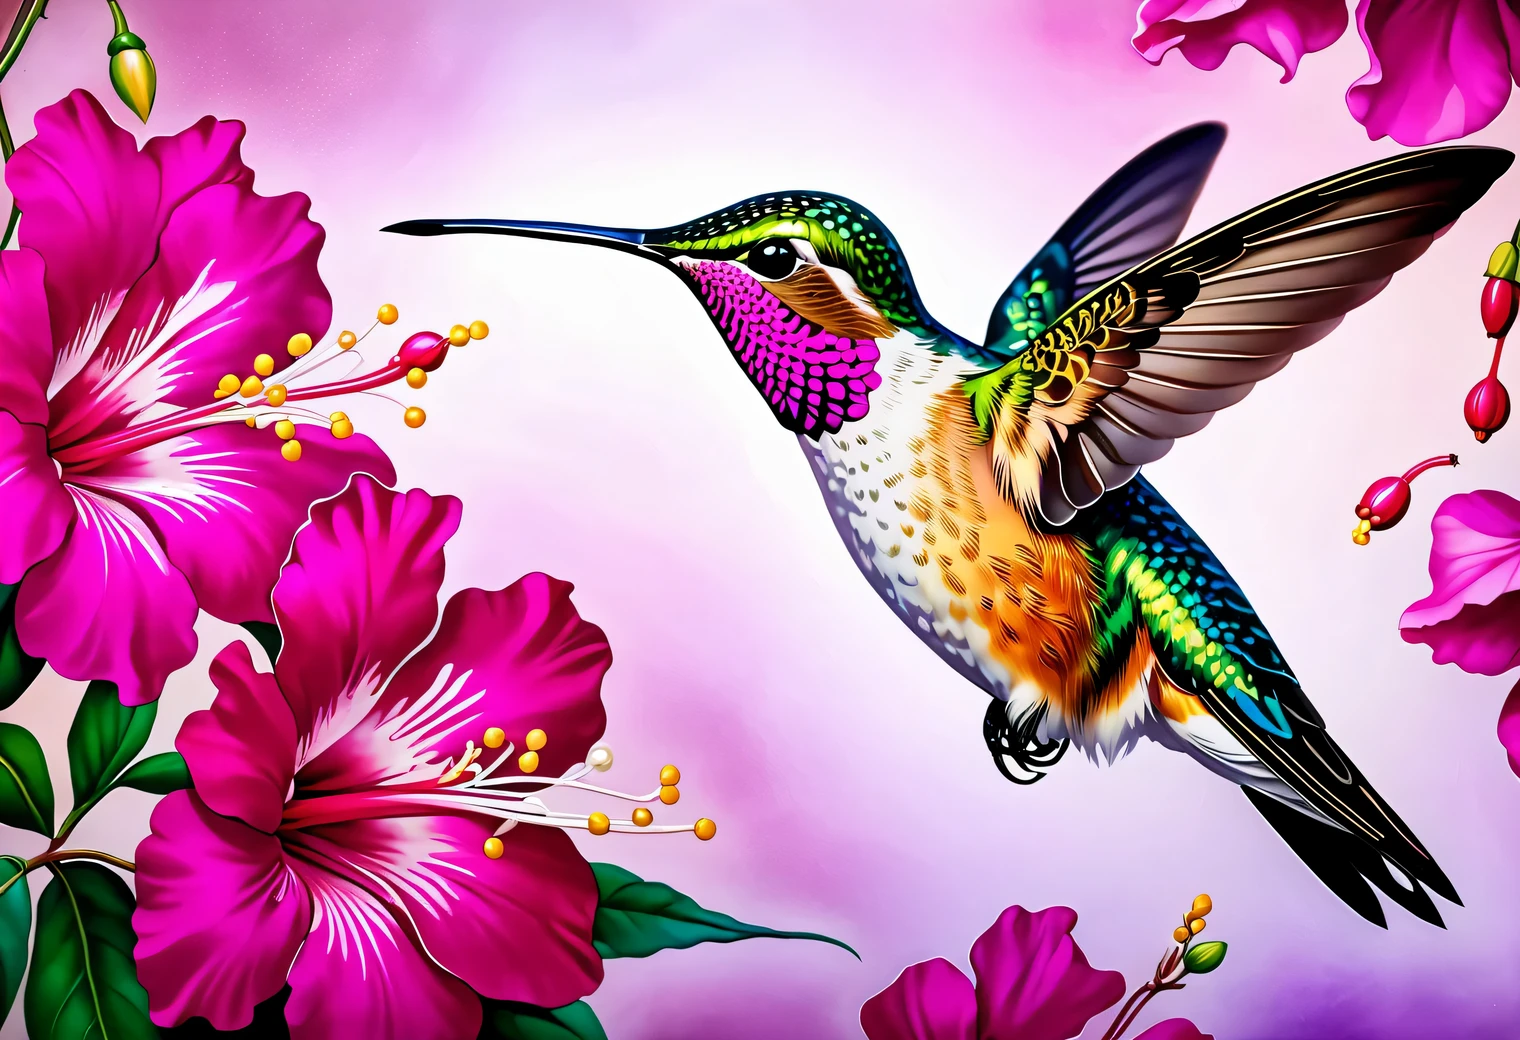 The art of painting on silk, batik, hand painted silk, 1 bright hummingbird with two wings drinks nectar from a flower, High detail, Texture smoothing, pearlescent silk shine, pearlescent color palette, centered focus, depth of field, Smooth transitions, blurry outlines, colors with pearlescent shades, fog effect around the edges of the image